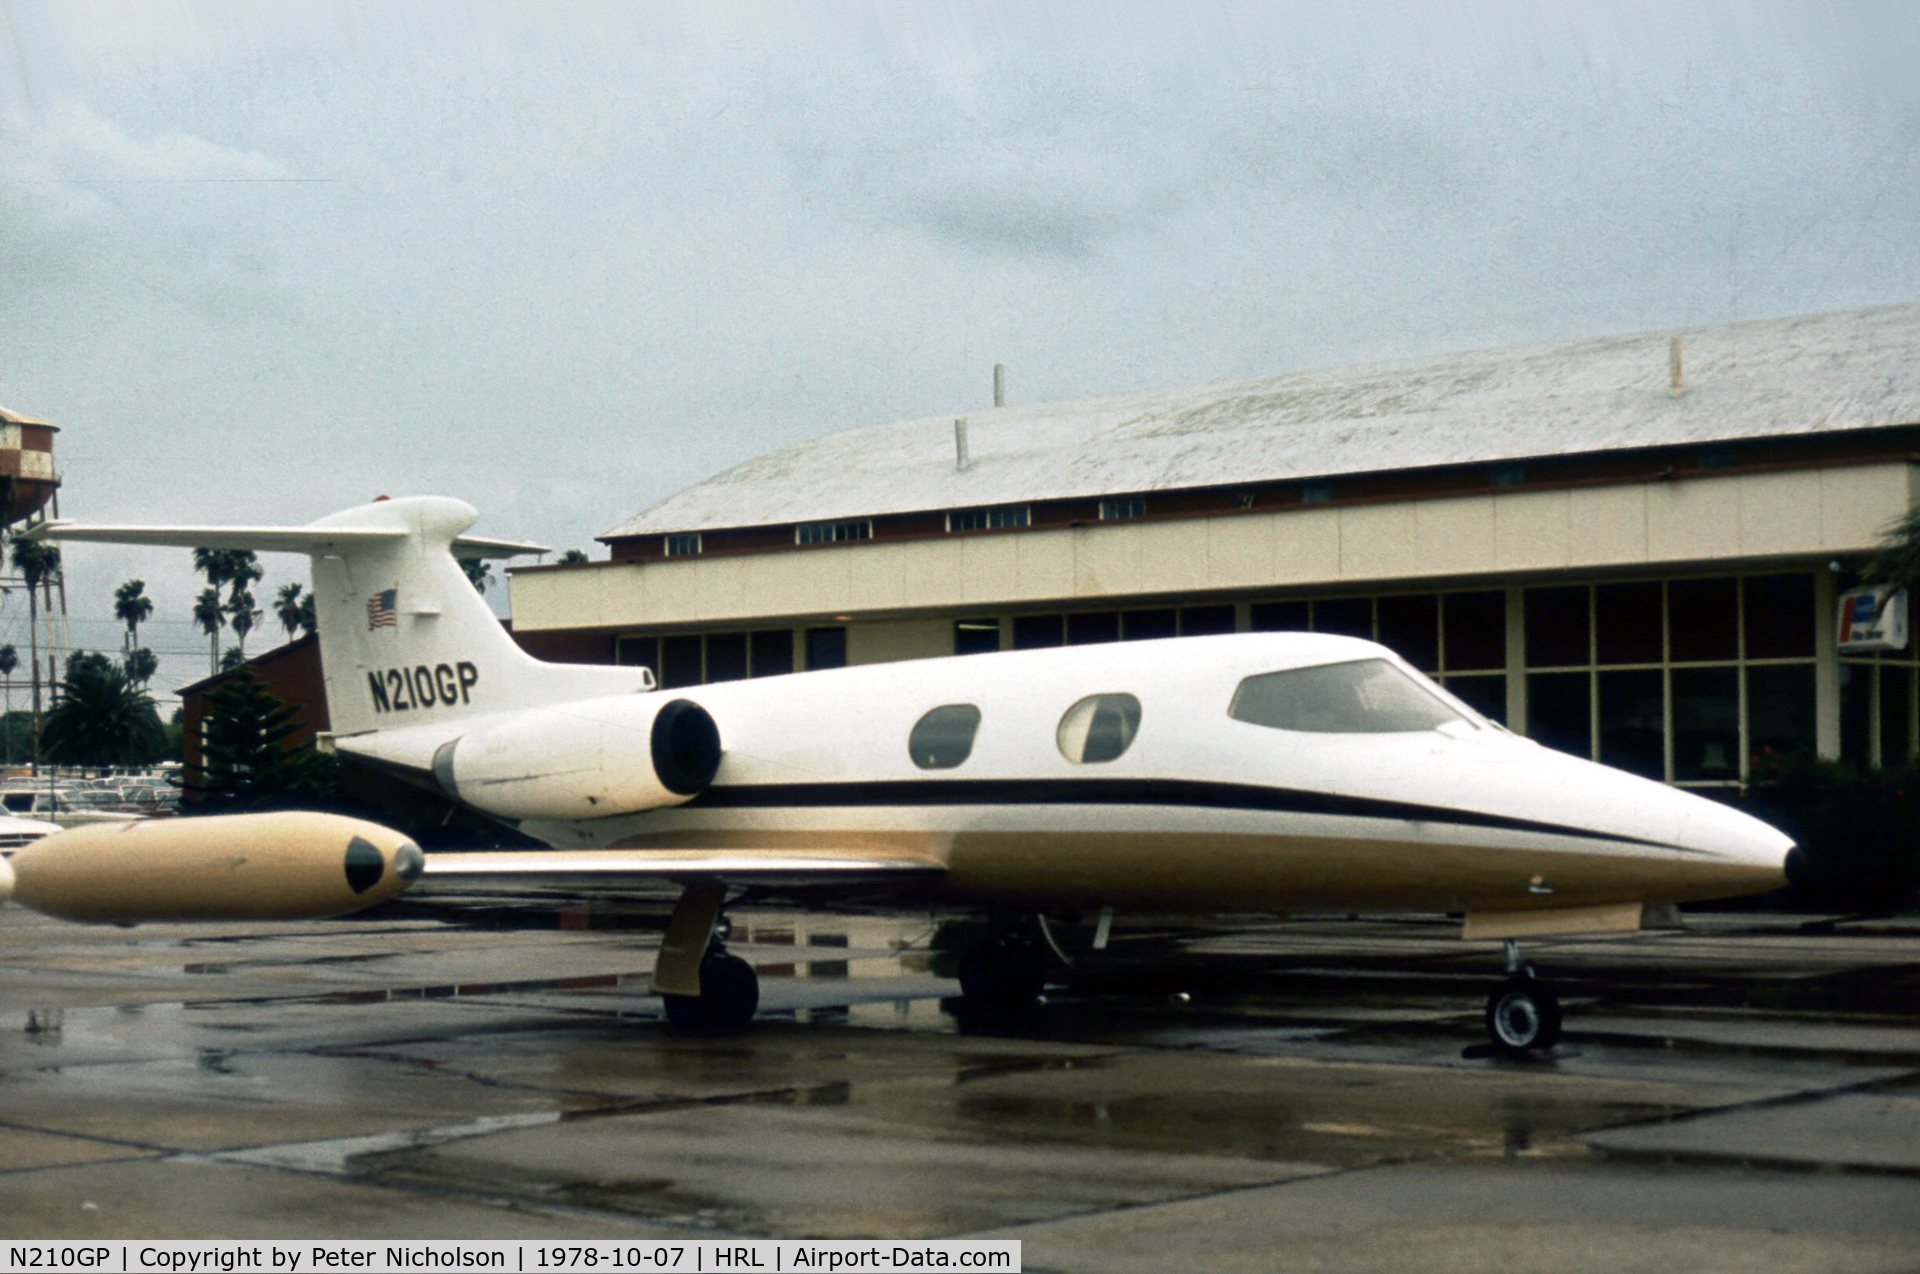 N210GP, 1965 Learjet 23 C/N 23-020, A visitor to Harlingen during the 1978 Confederate Air Force Airshow.